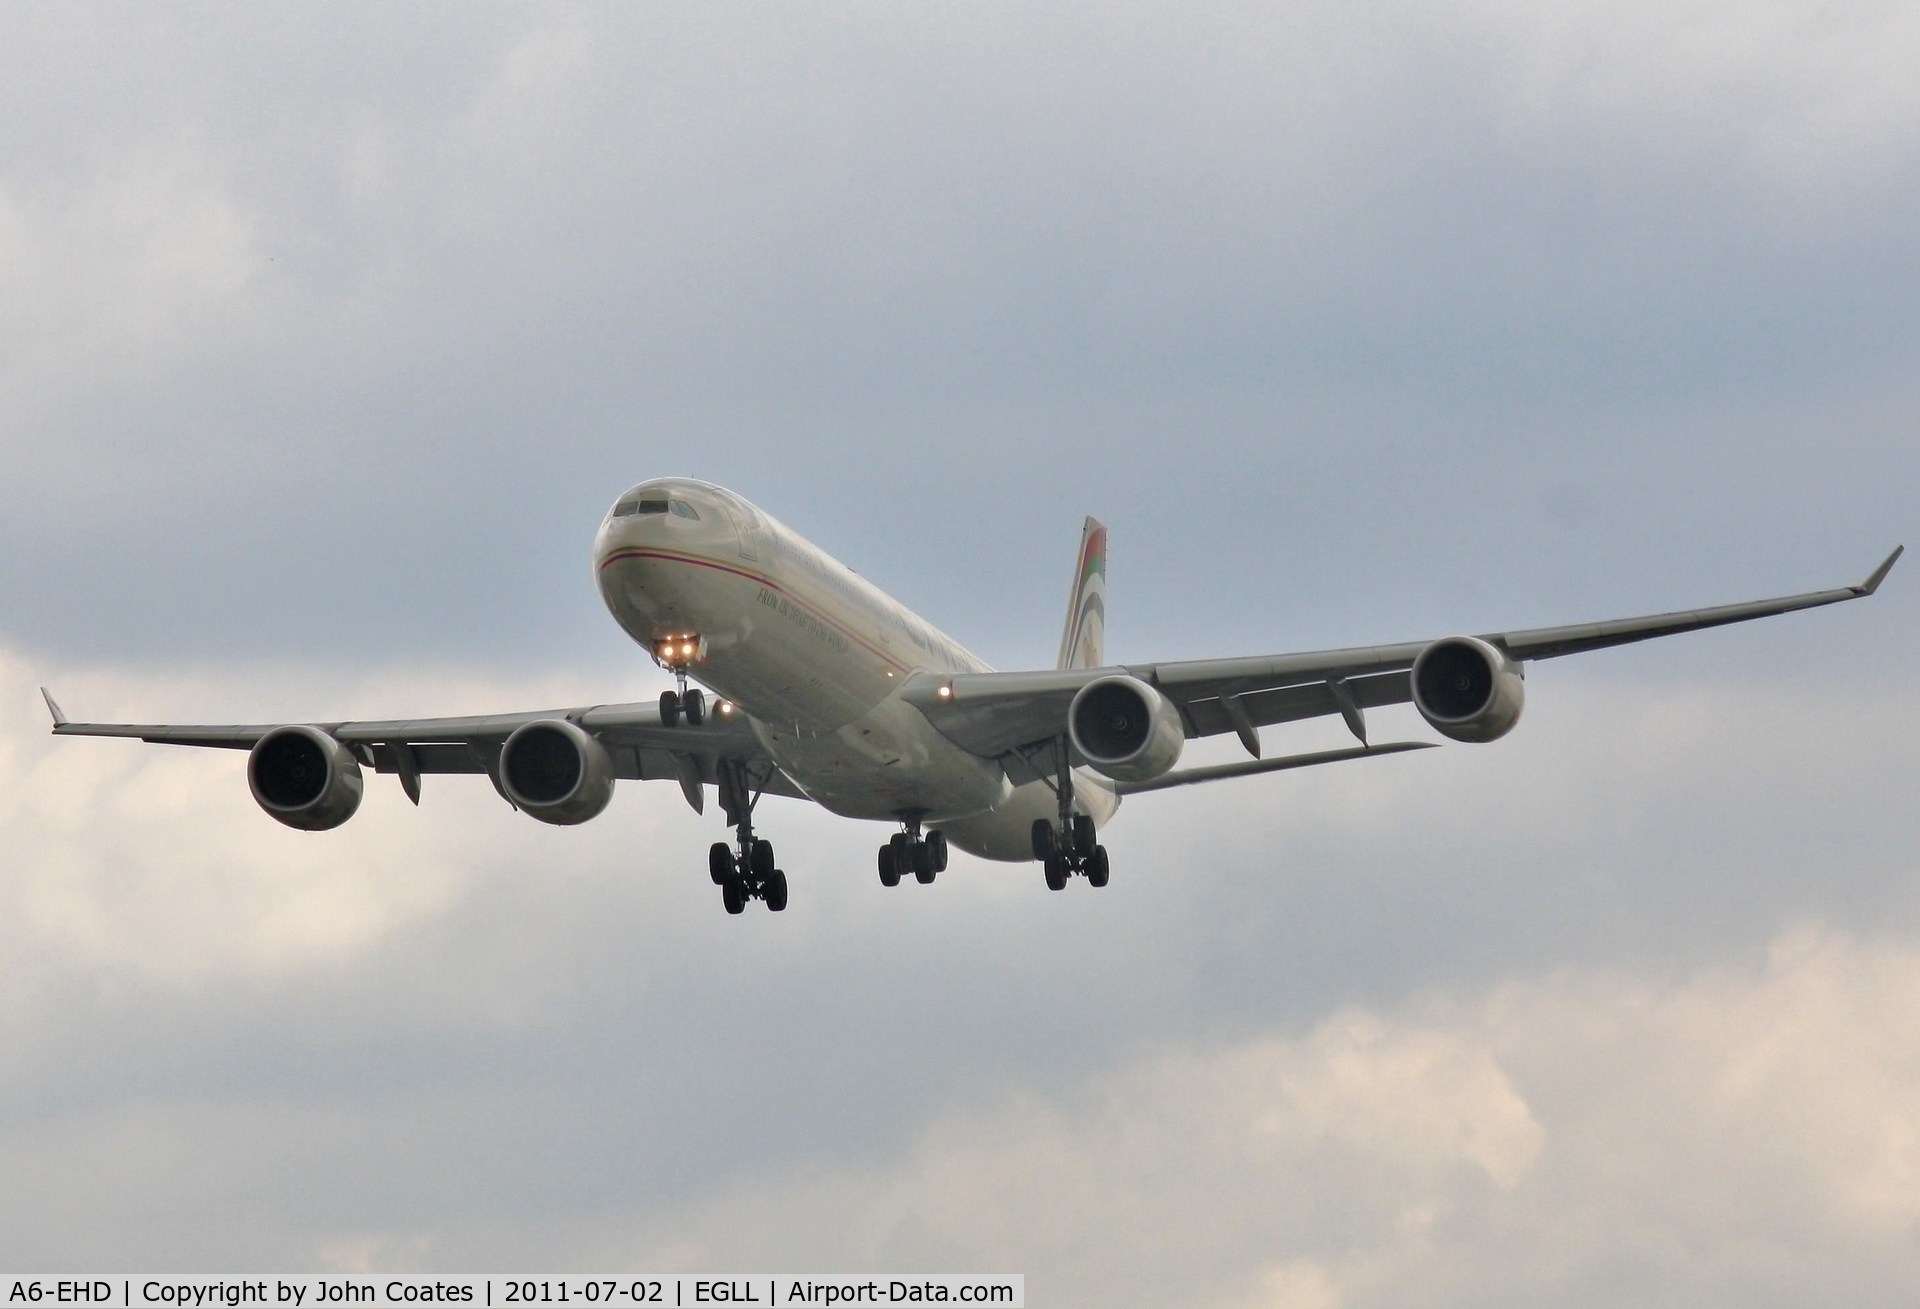 A6-EHD, 2006 Airbus A340-541 C/N 783, On approach to 27L